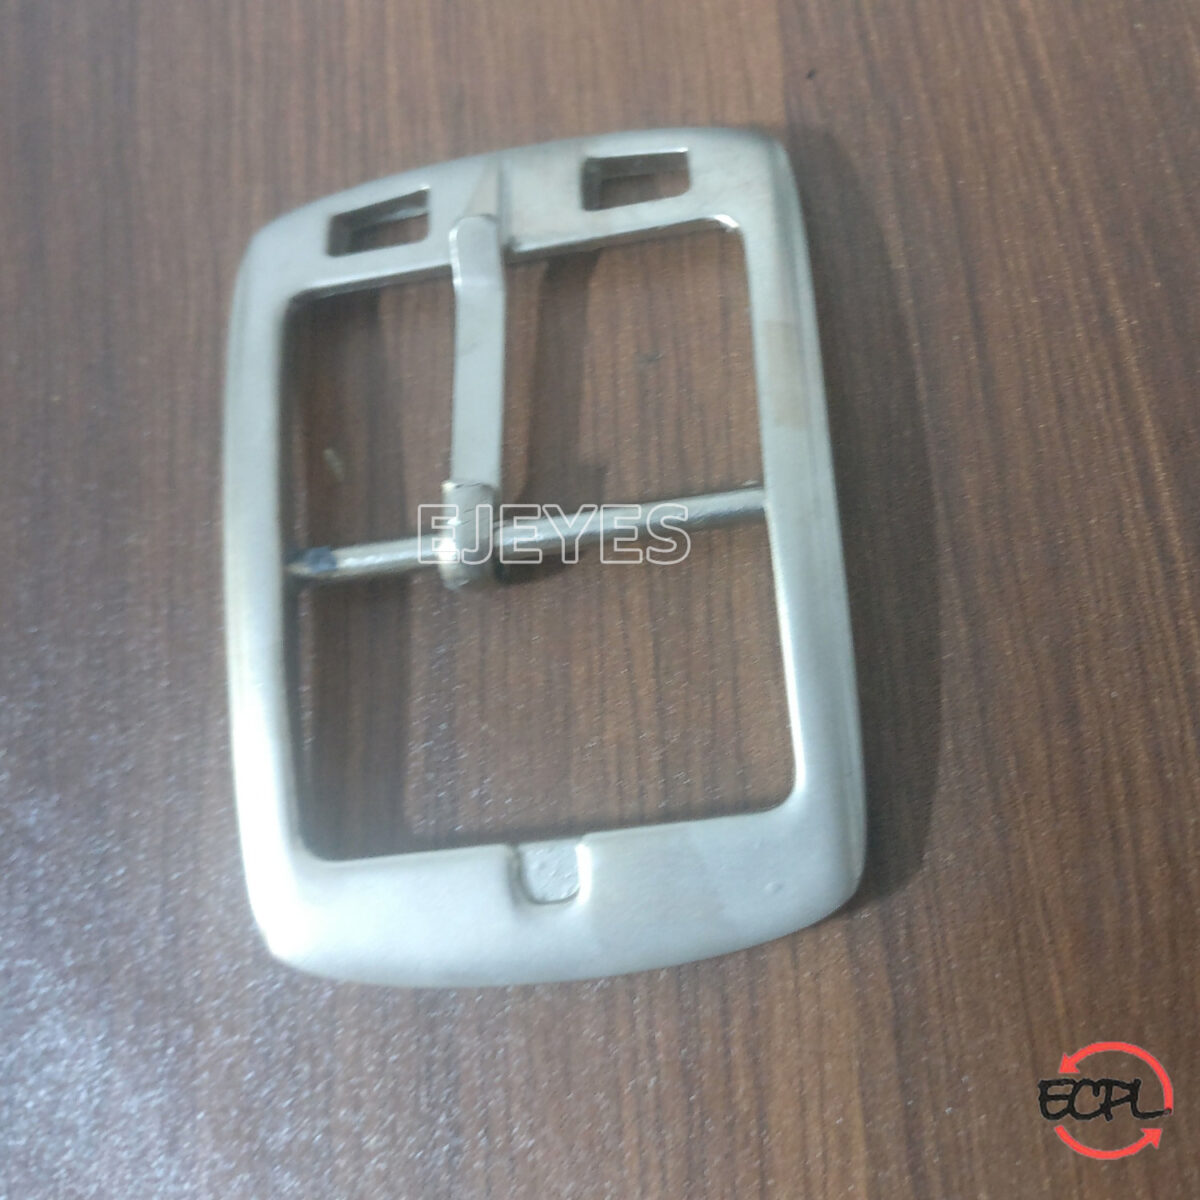 The 40mm nickel-plated belt buckle is strong, adaptable, and secure, making it perfect for a range of hardware applications.